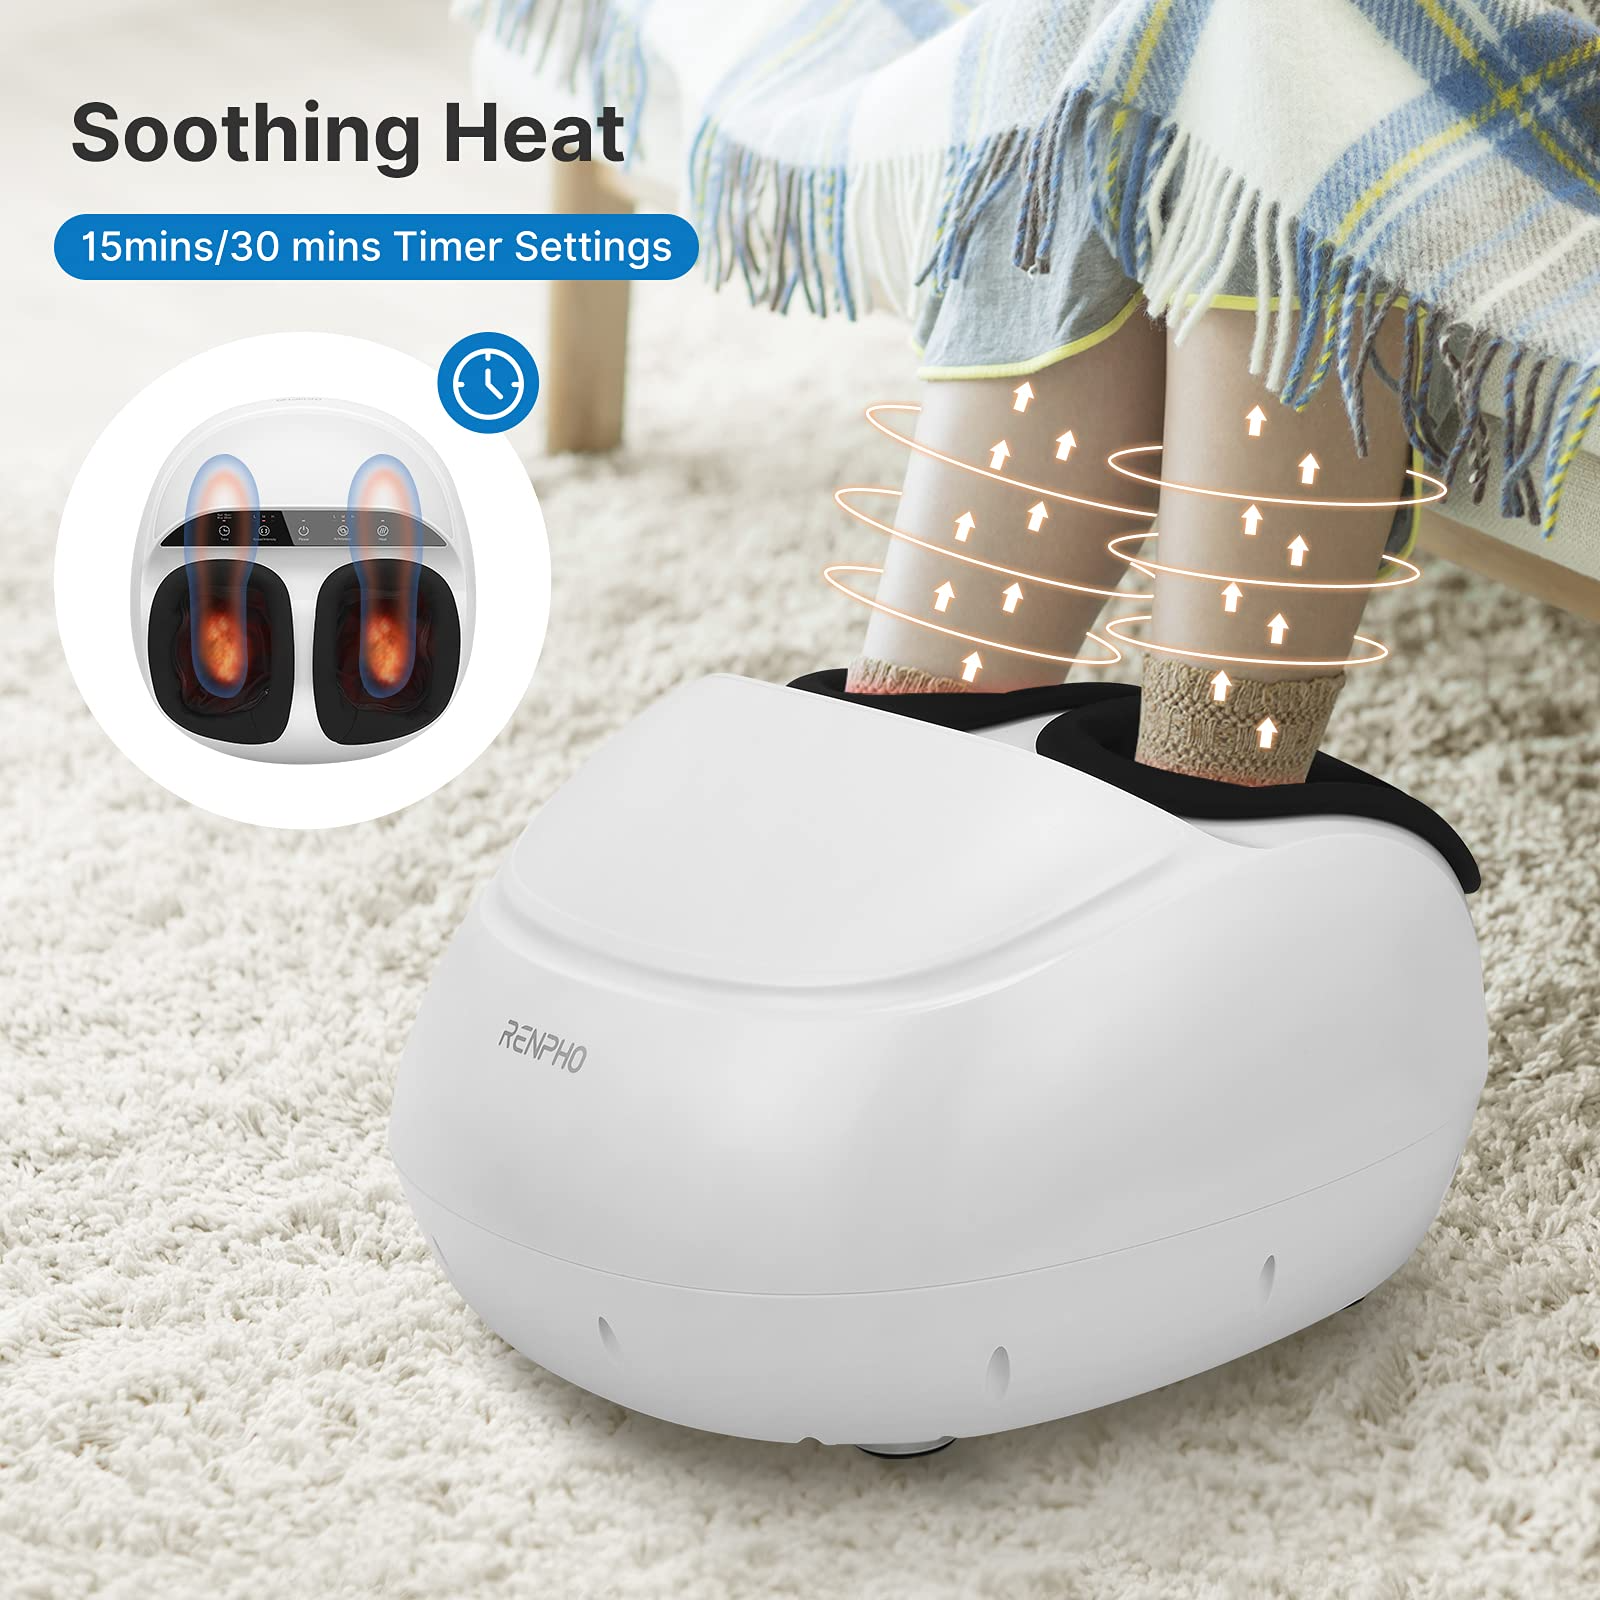 RENPHO Foot Massager Machine with Heat, Shiatsu Deep Kneading, Multi-Level Settings, Delivers Relief for Tired Muscles and Plantar Fasciitis, Fits Feet Up to Men Size 12 - image 2 of 9